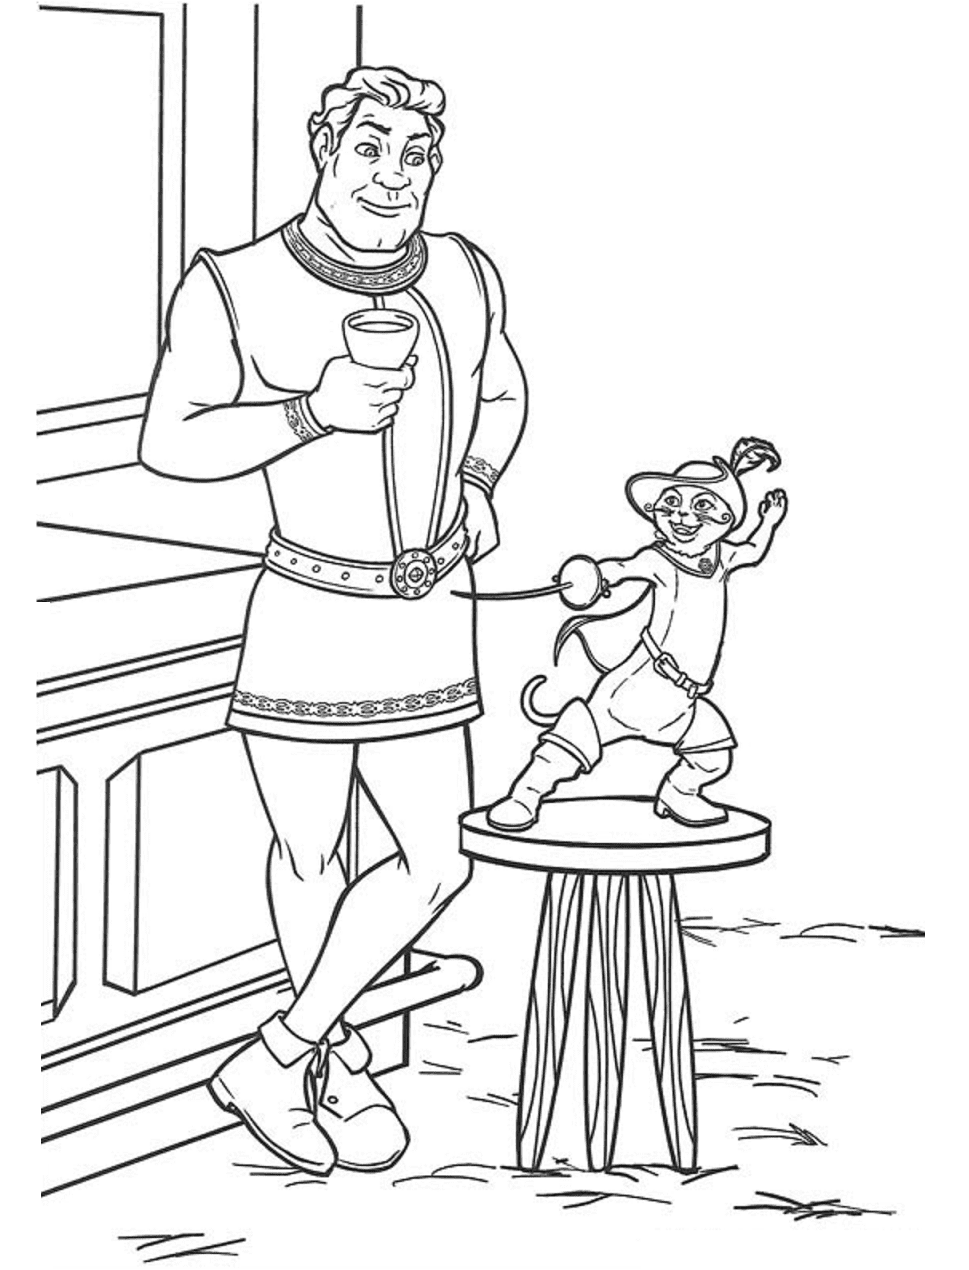 Shrek With Puss In Boots Coloring Page